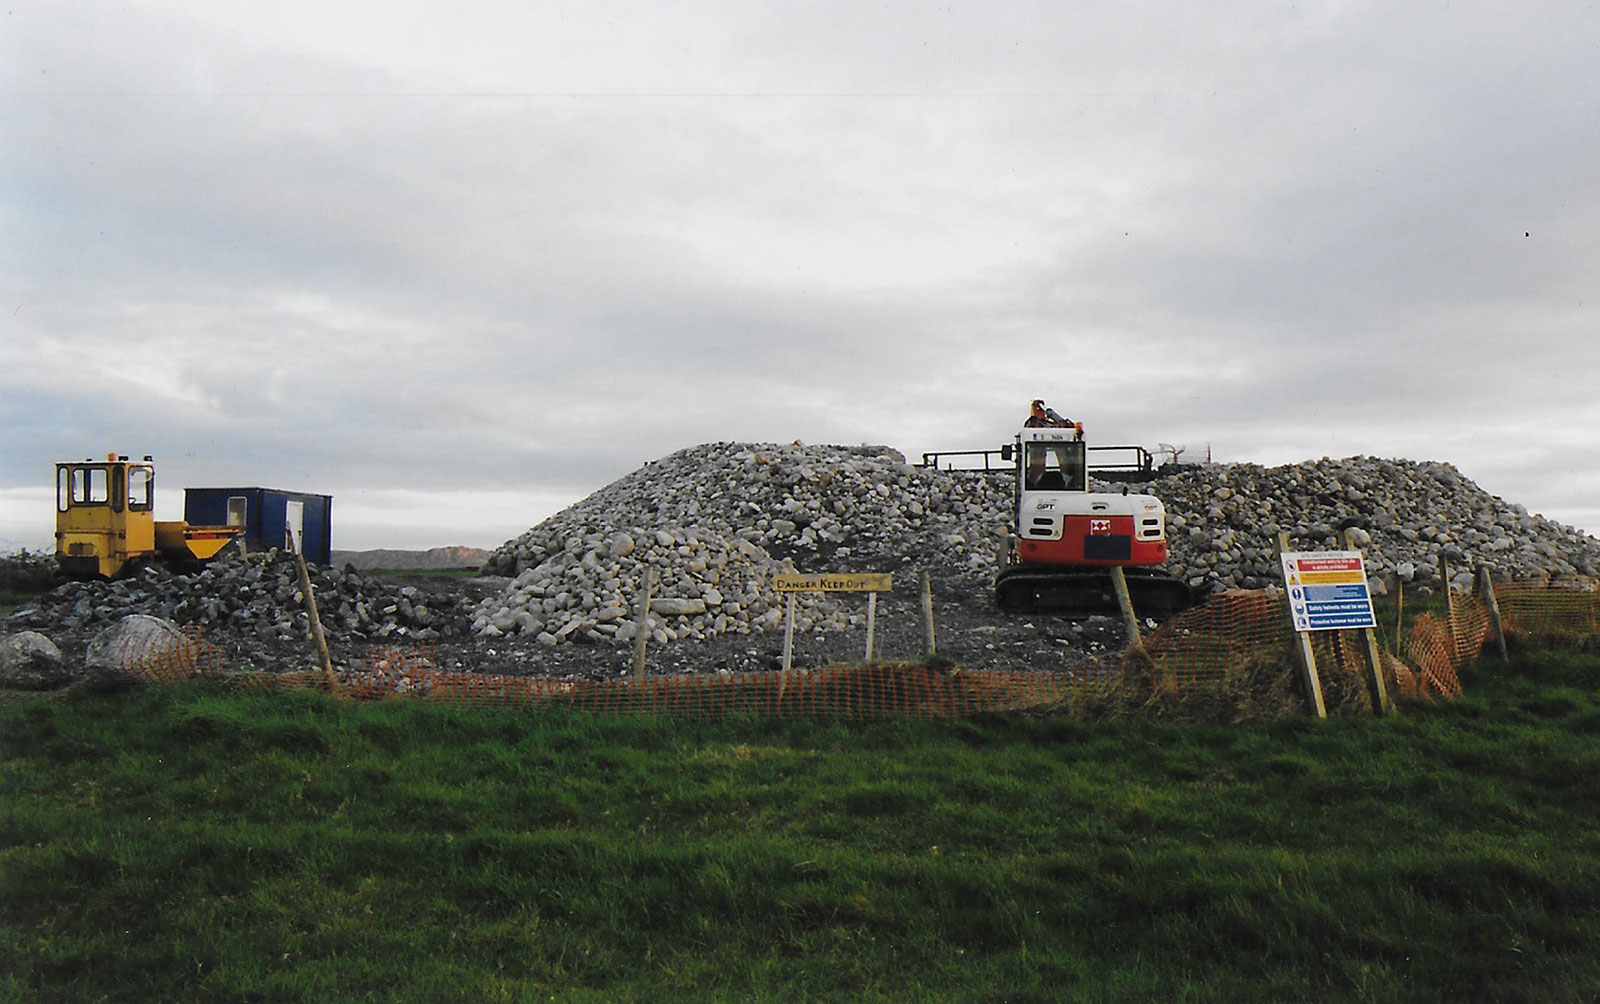 The OPW reconstructing the cairn at Listoghil in Carrowmore.